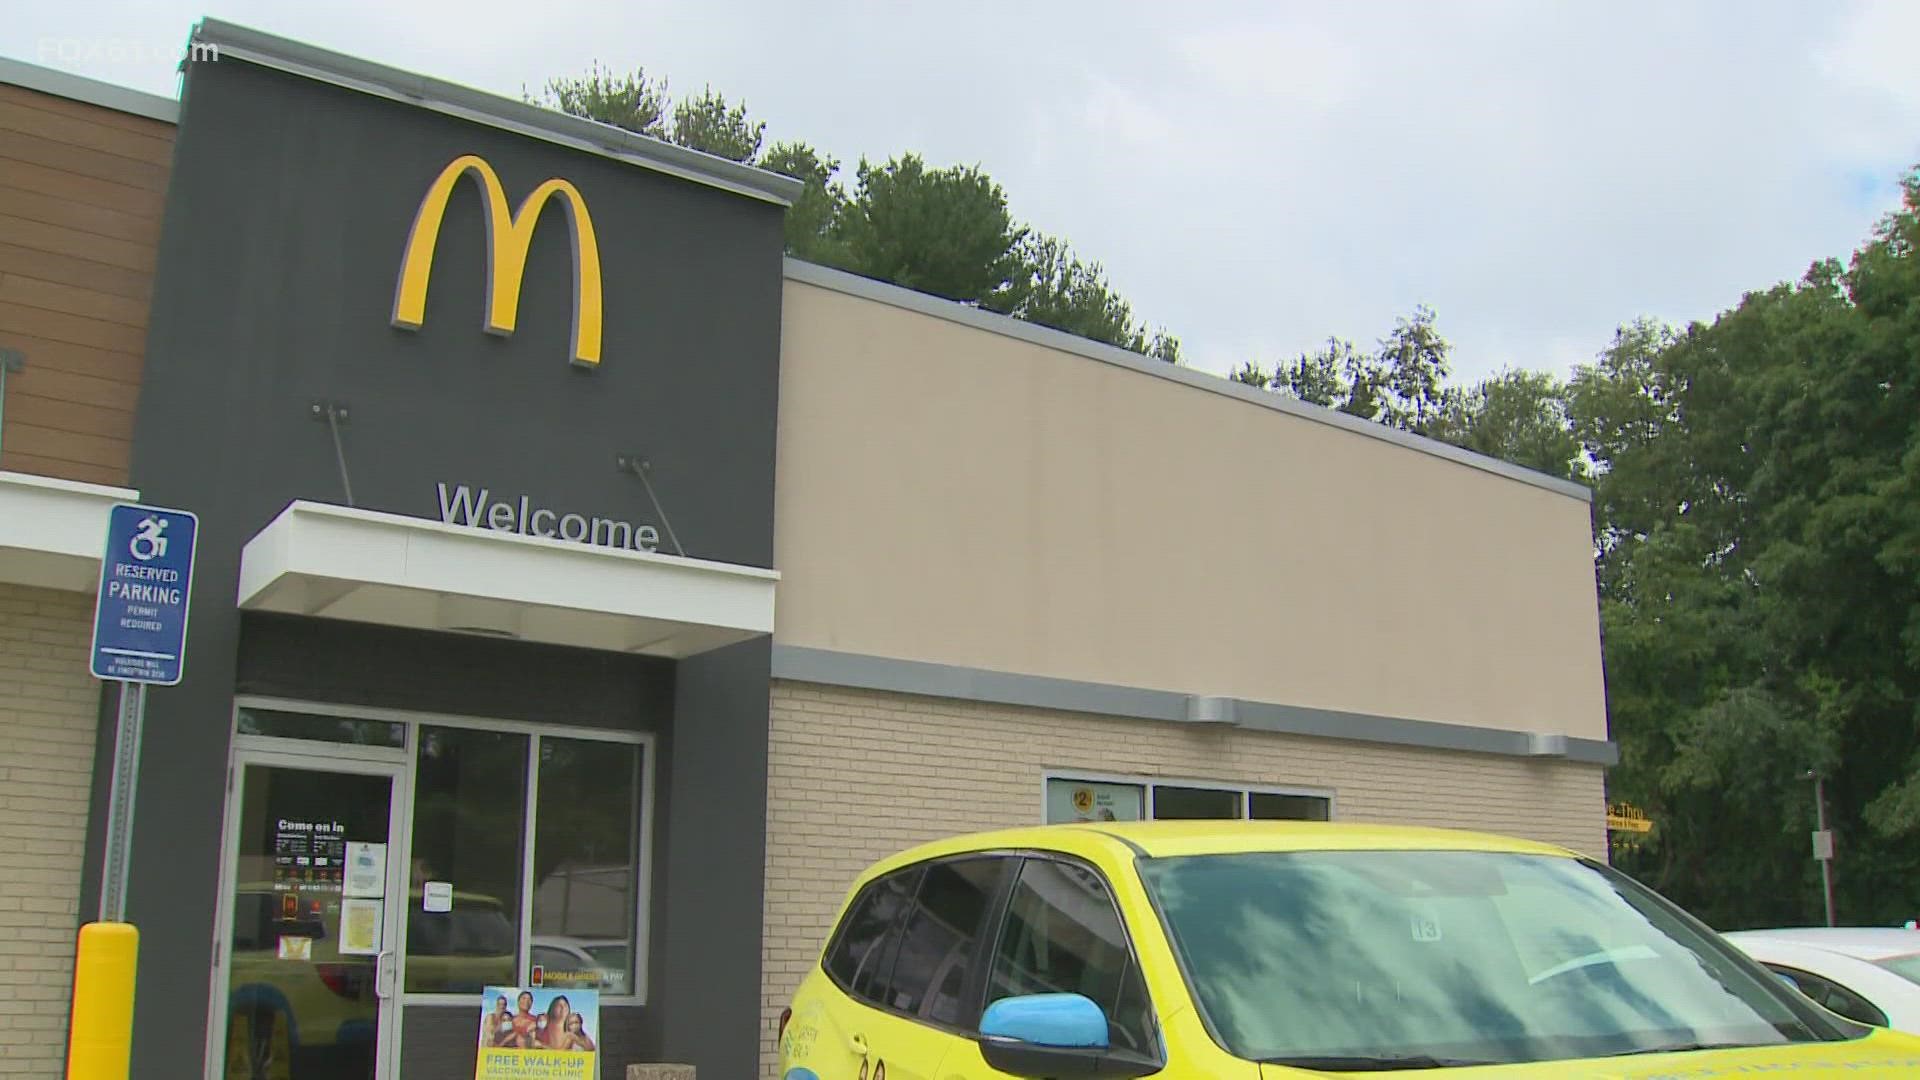 McDonald’s has teamed up with the professionals from Griffin Health to provide the shots.